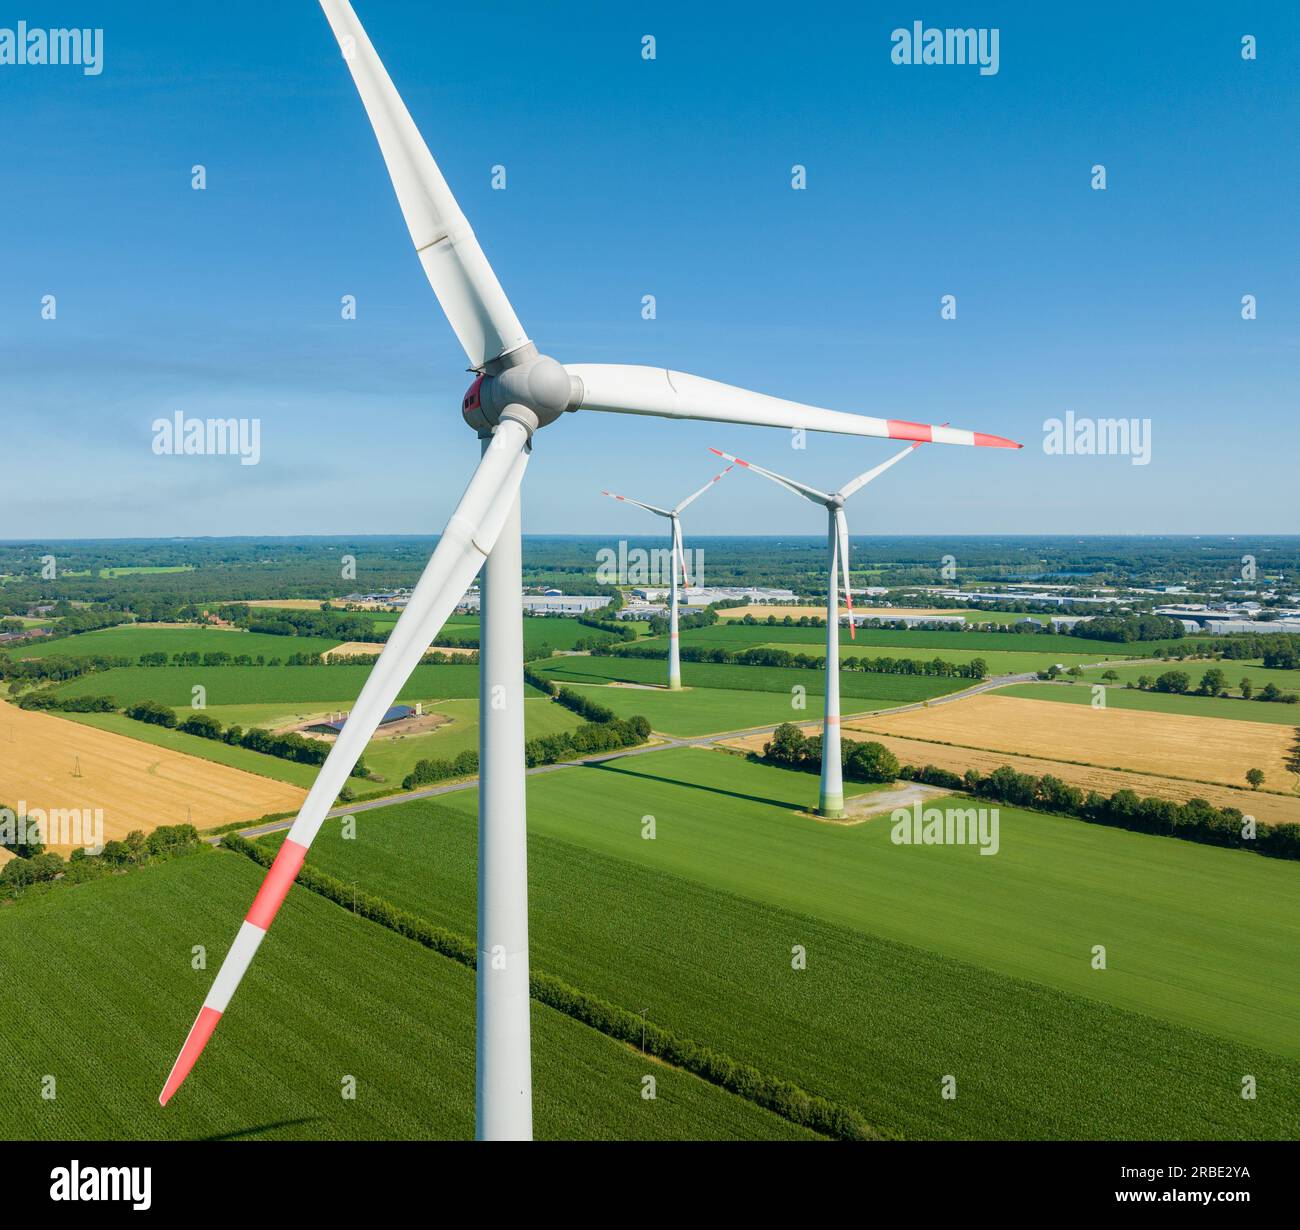 three wind turbines in an agricultural landscape seen from the air Stock Photo